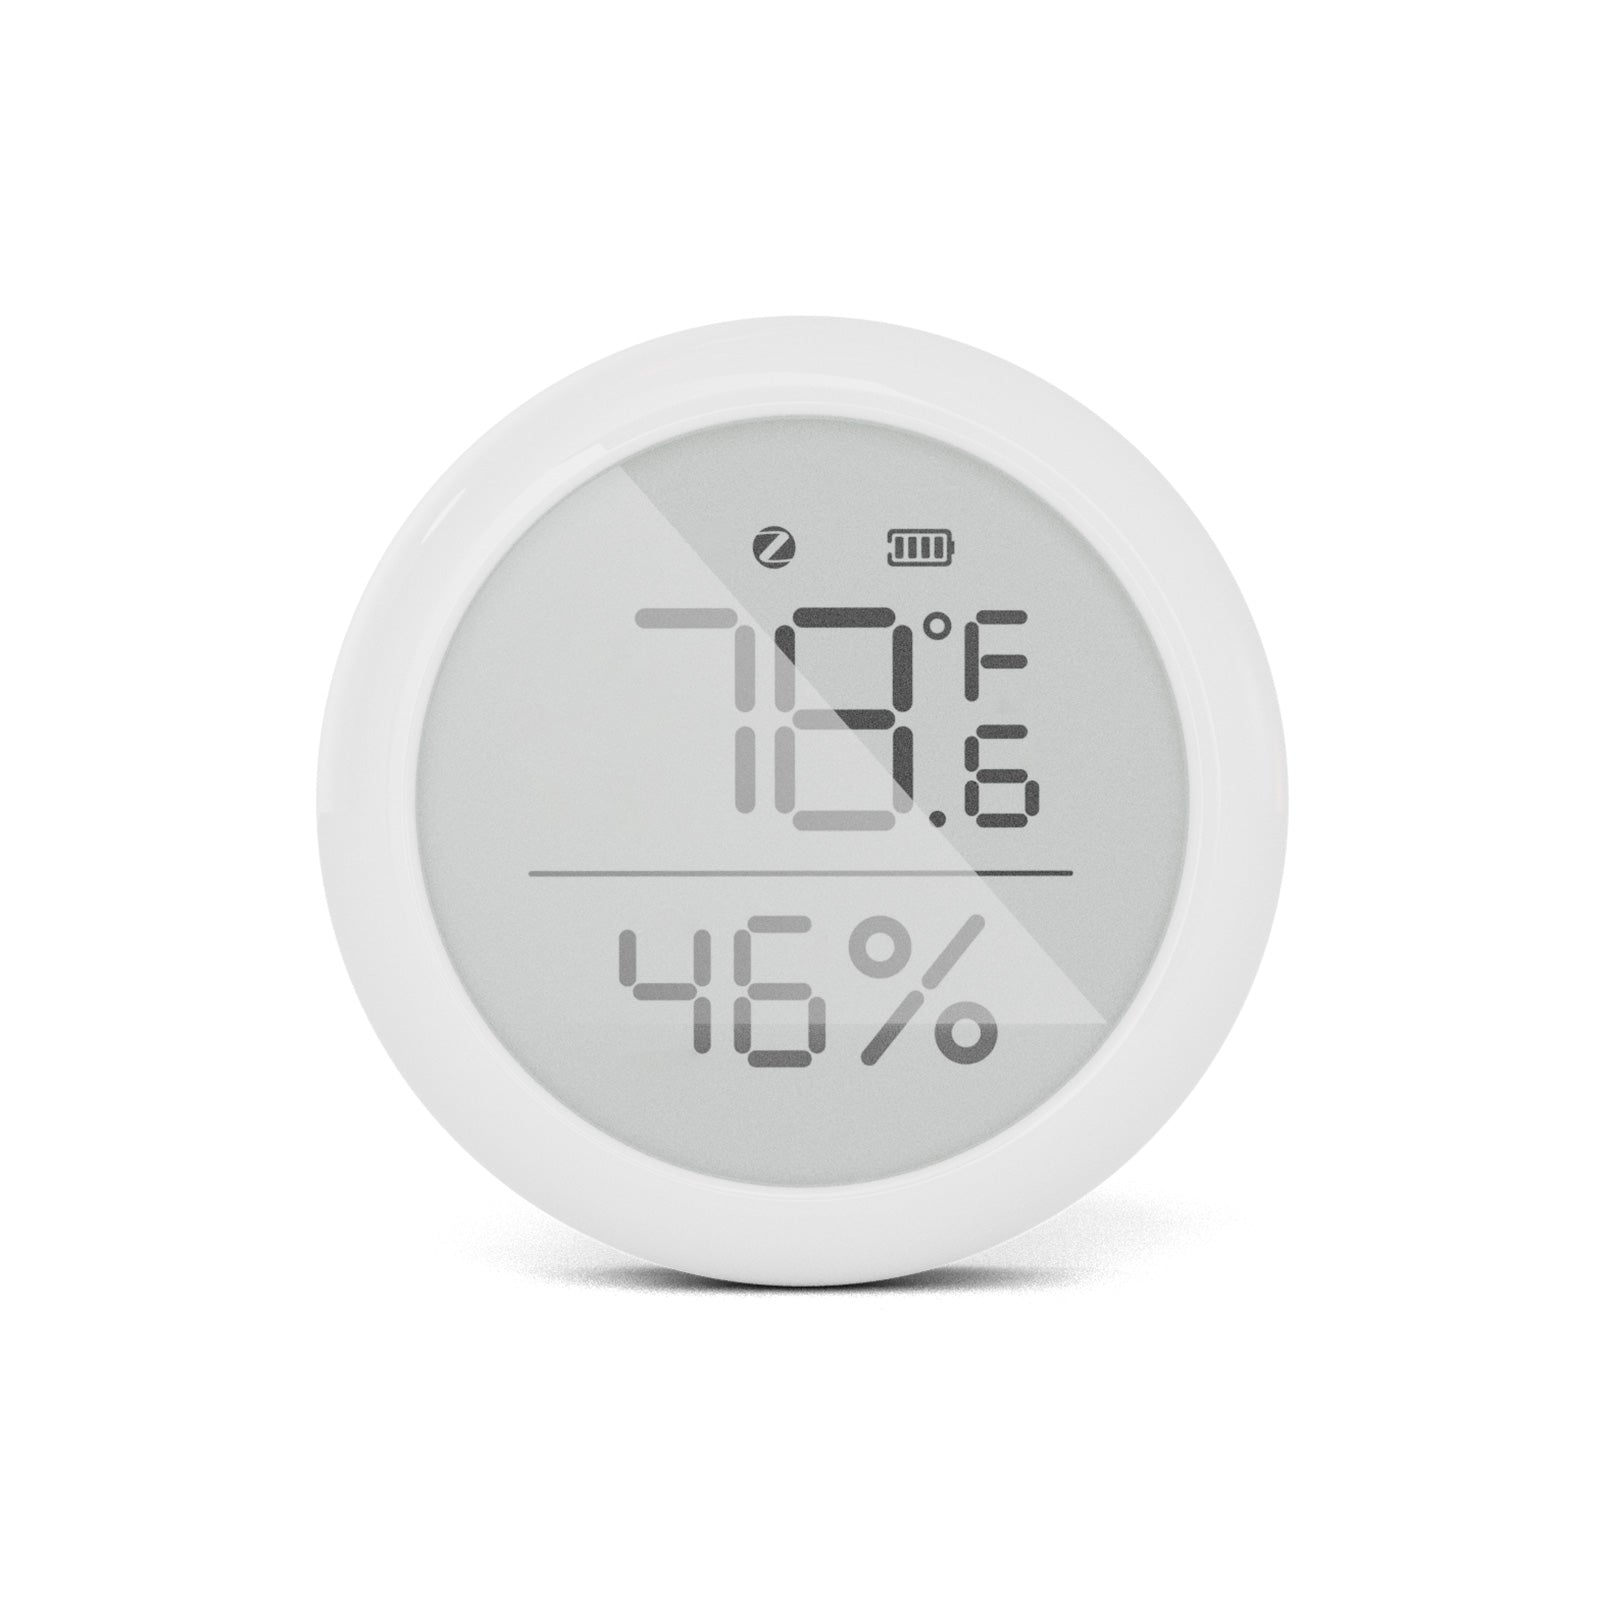 XUELILI Smart Thermometer Hygrometer, ZigBee Wireless Indoor Temperature  and Humidity Monitor Sensor Work with Alexa, Perfect for Home, Baby Room,  Greenhouse, Basement, Pet Reptile Kennel